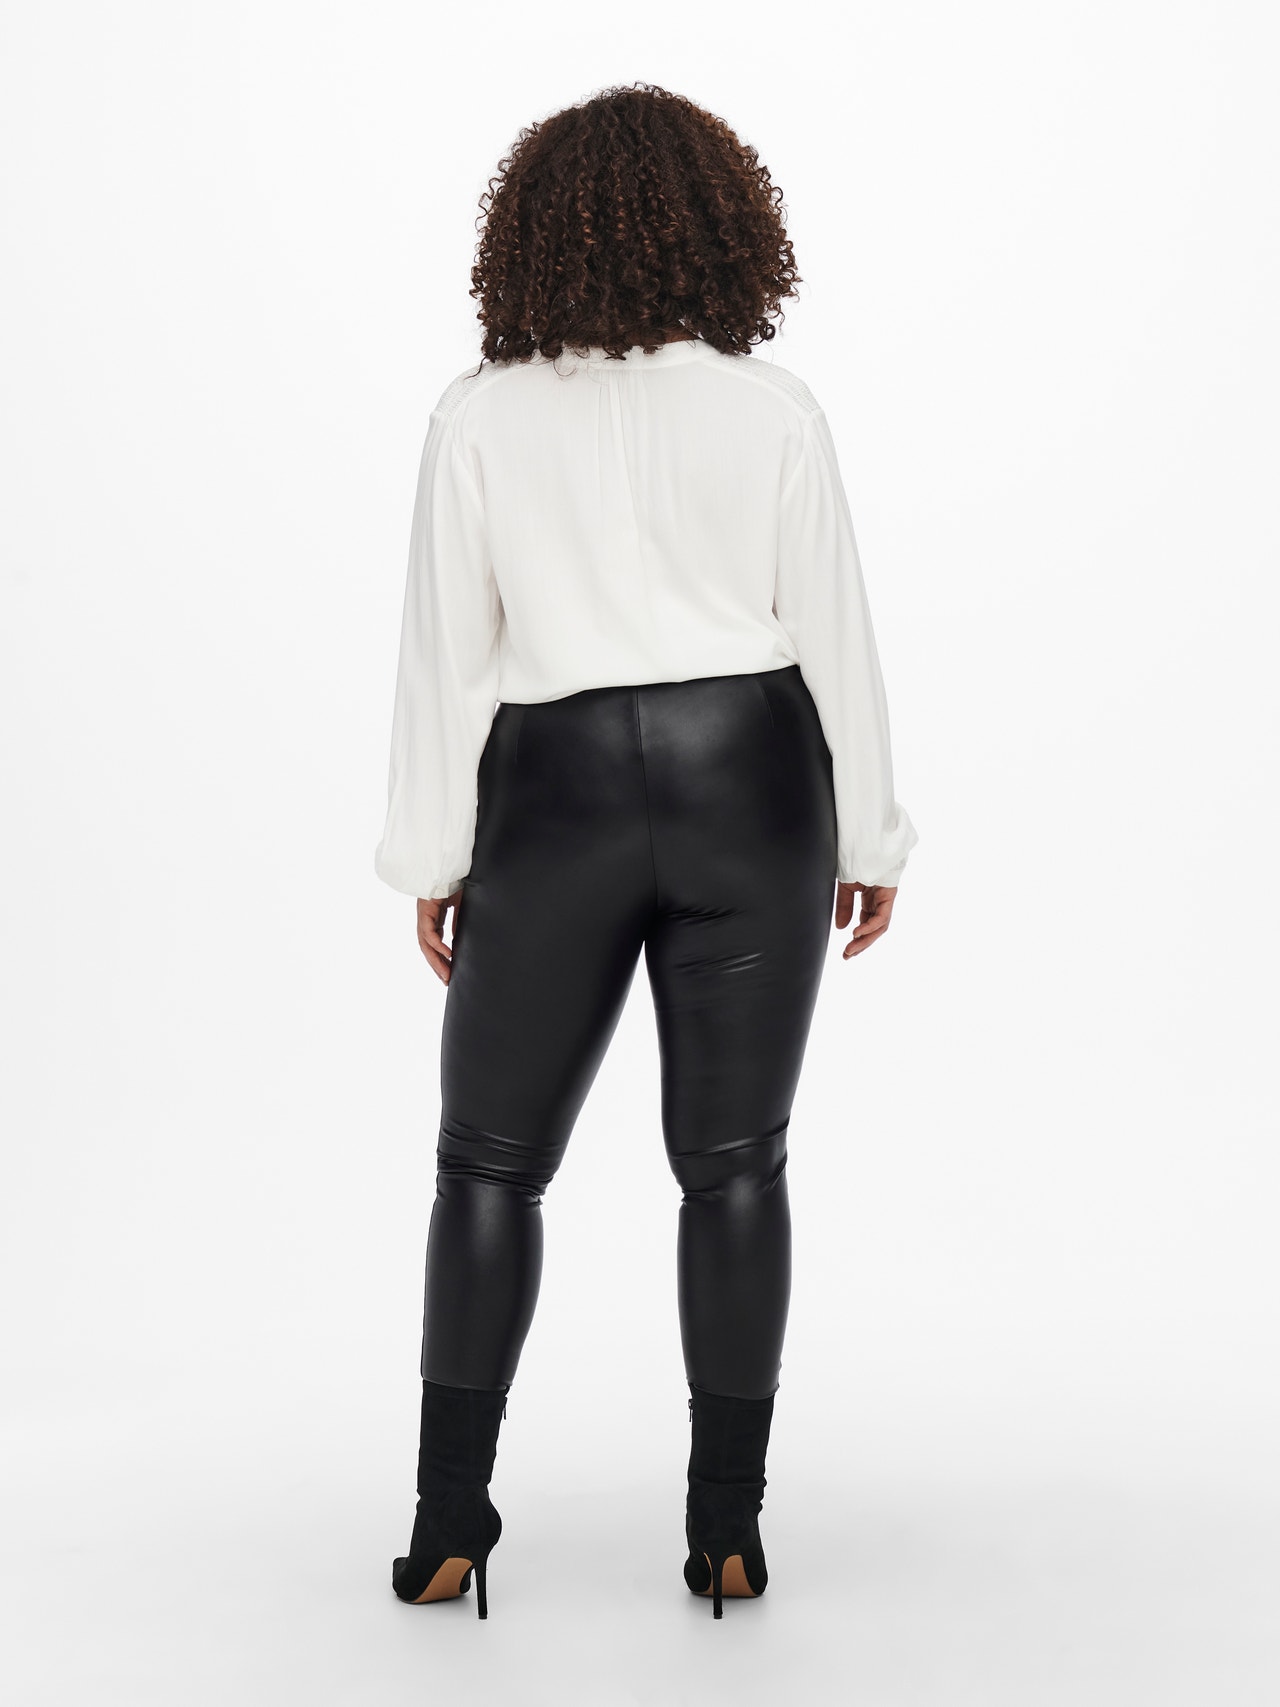 Only Curve faux leather leggings in black